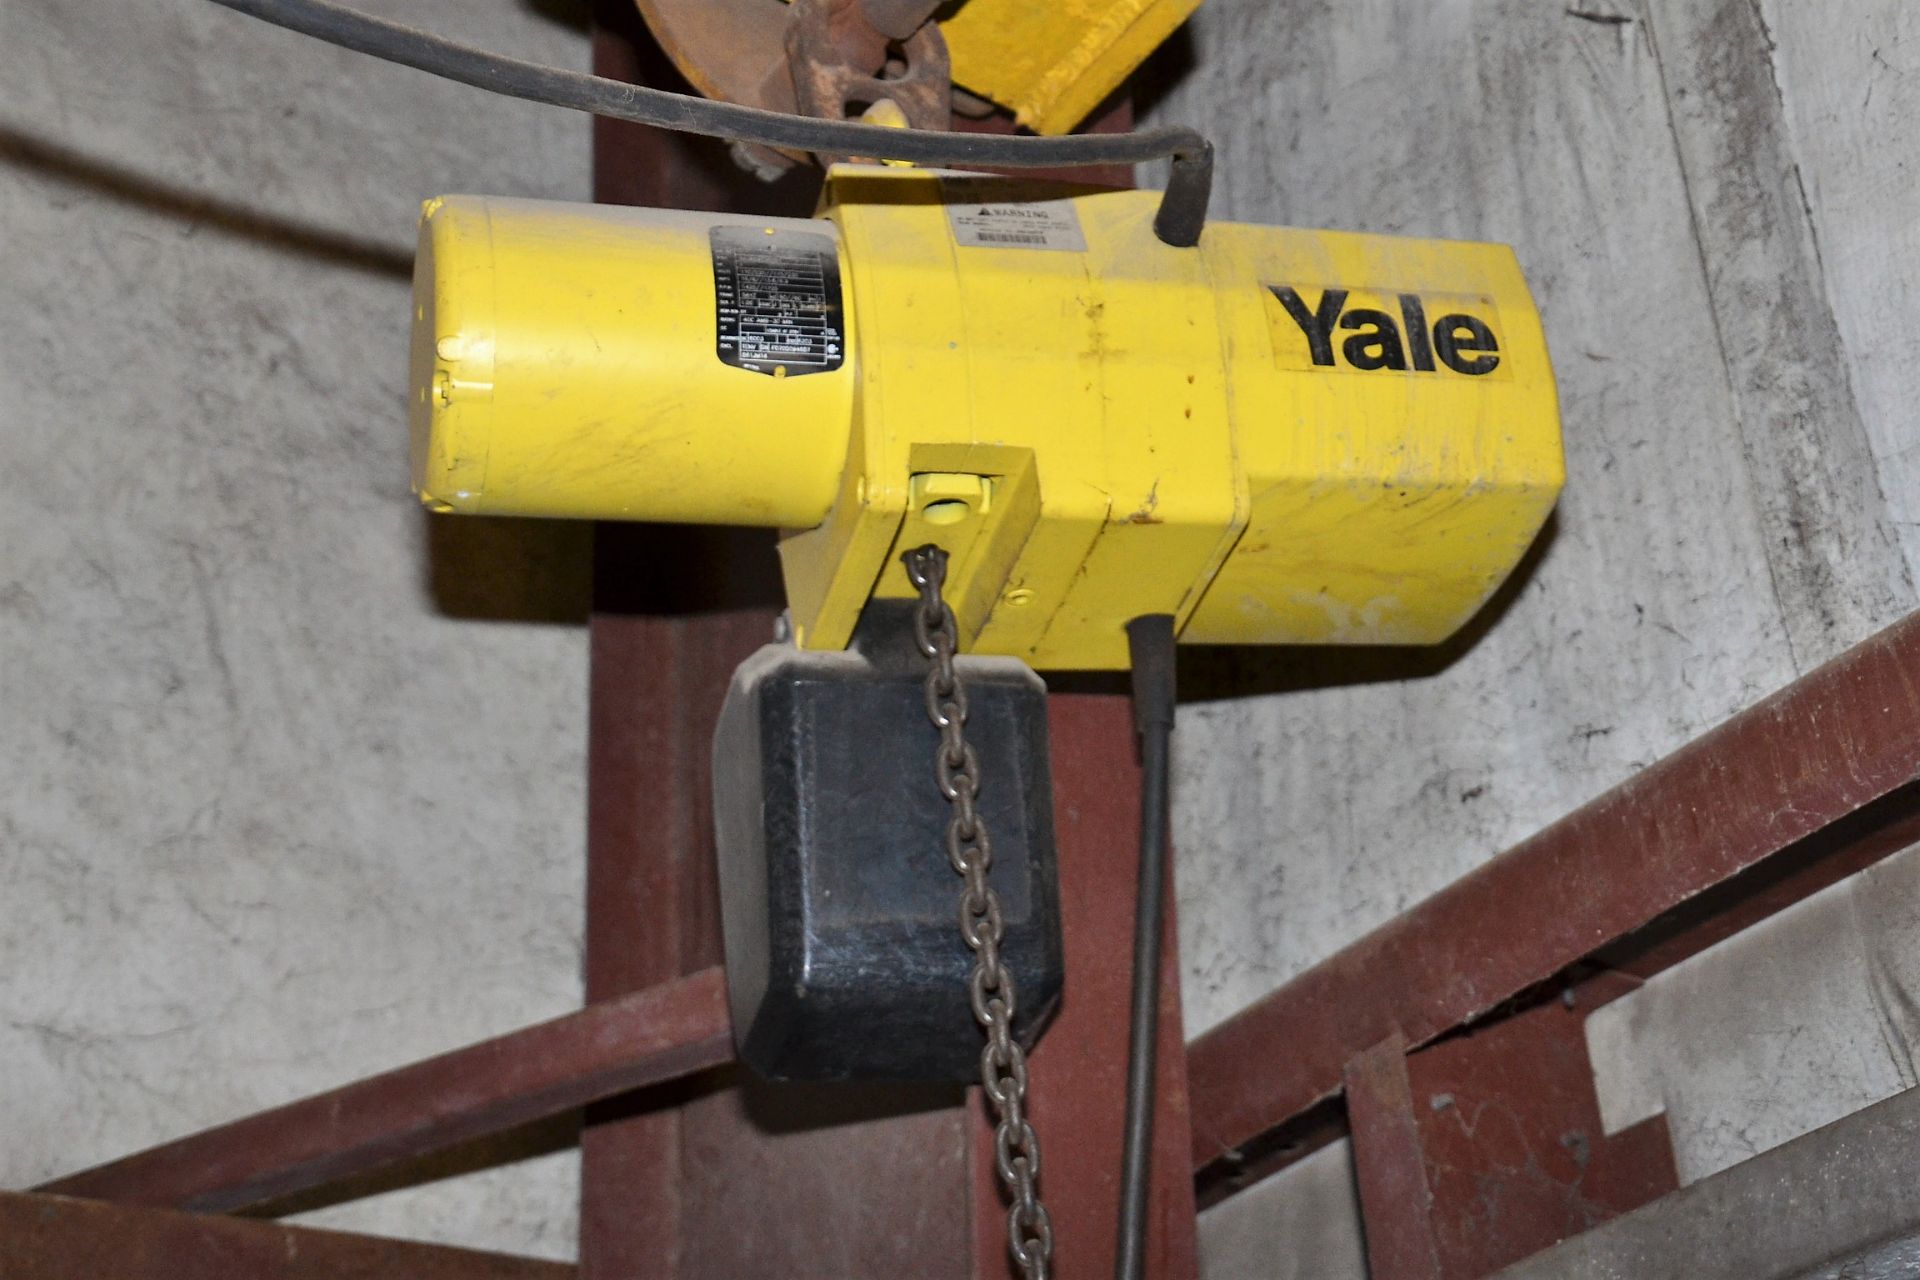 FLOOR JIB, 1 TON CAP WITH 1 TON YALE ELECTRIC CHAIN HOIST, PENDENT CONTROL, 85" HOOK HEIGHT, 18 - Image 2 of 2